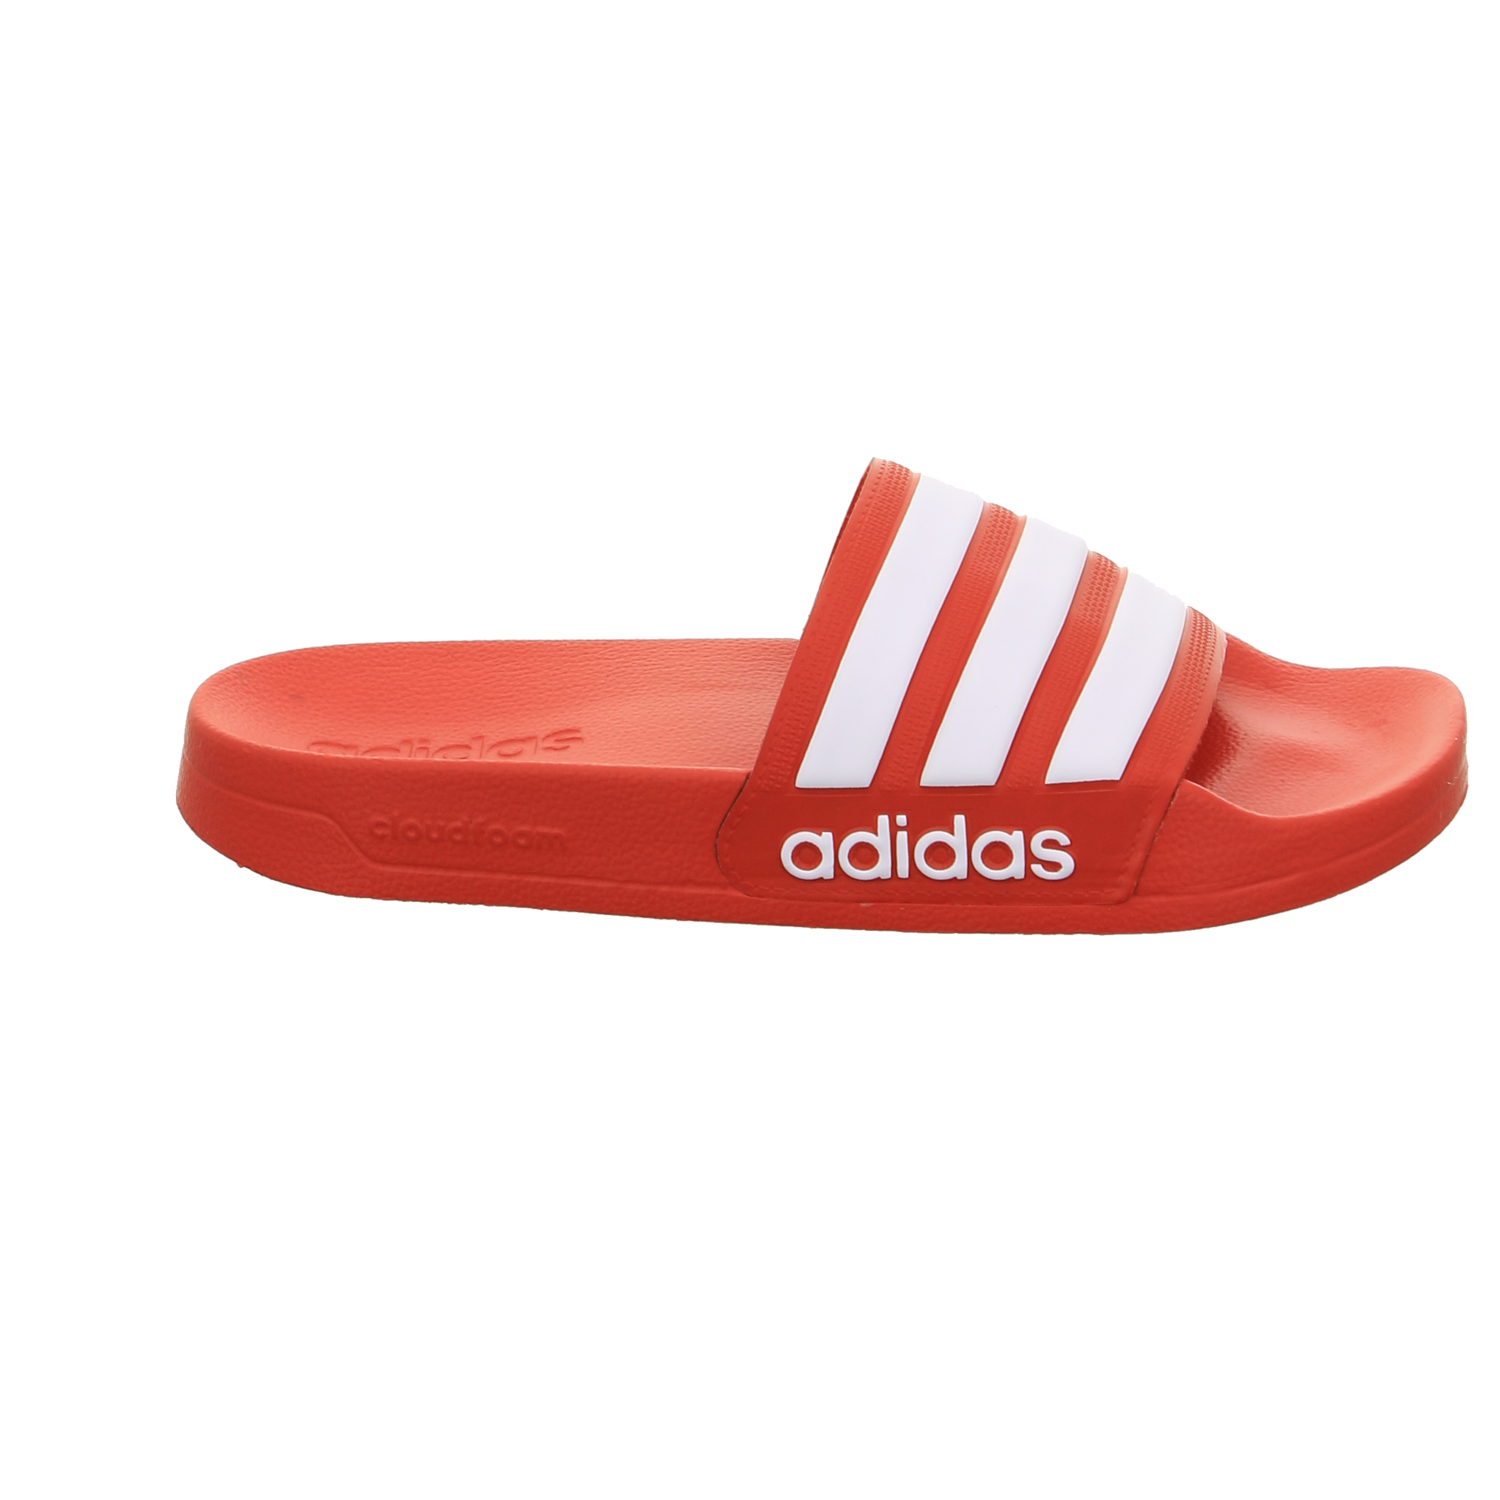 Adidas Casual-Pantolette rot